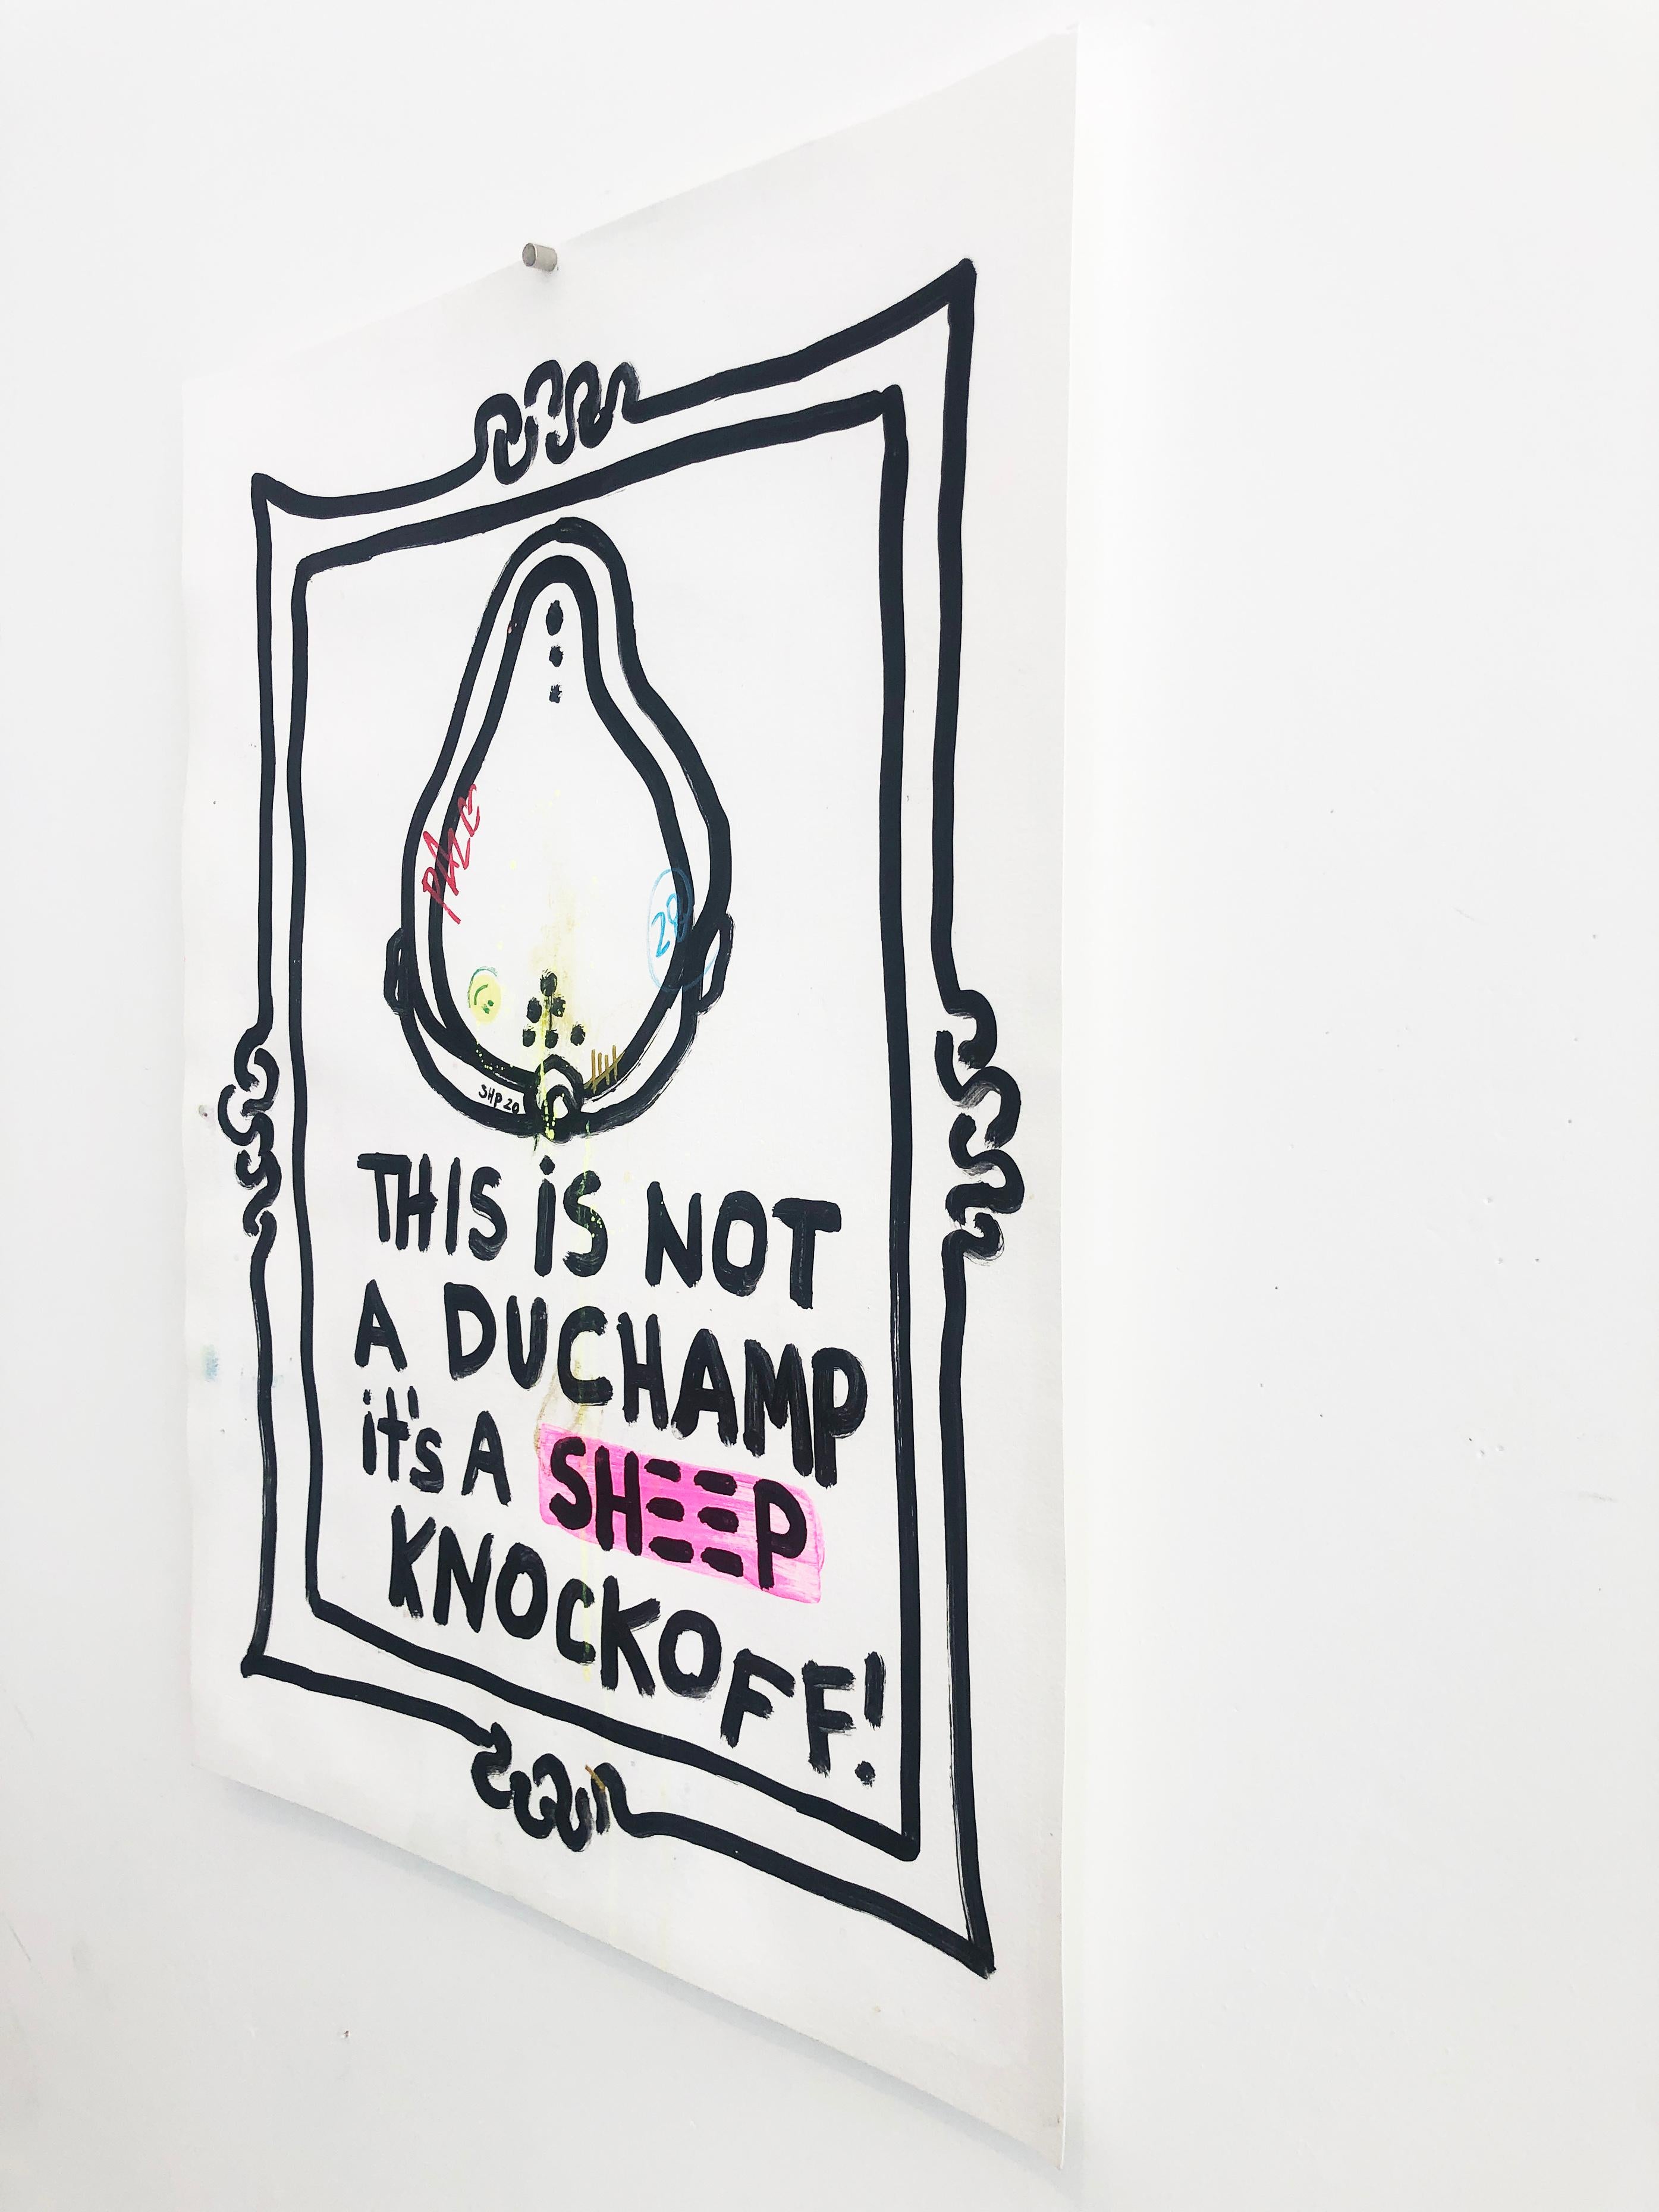 It's a Knockoff - Duchamp   acrylic on paper For Sale 1